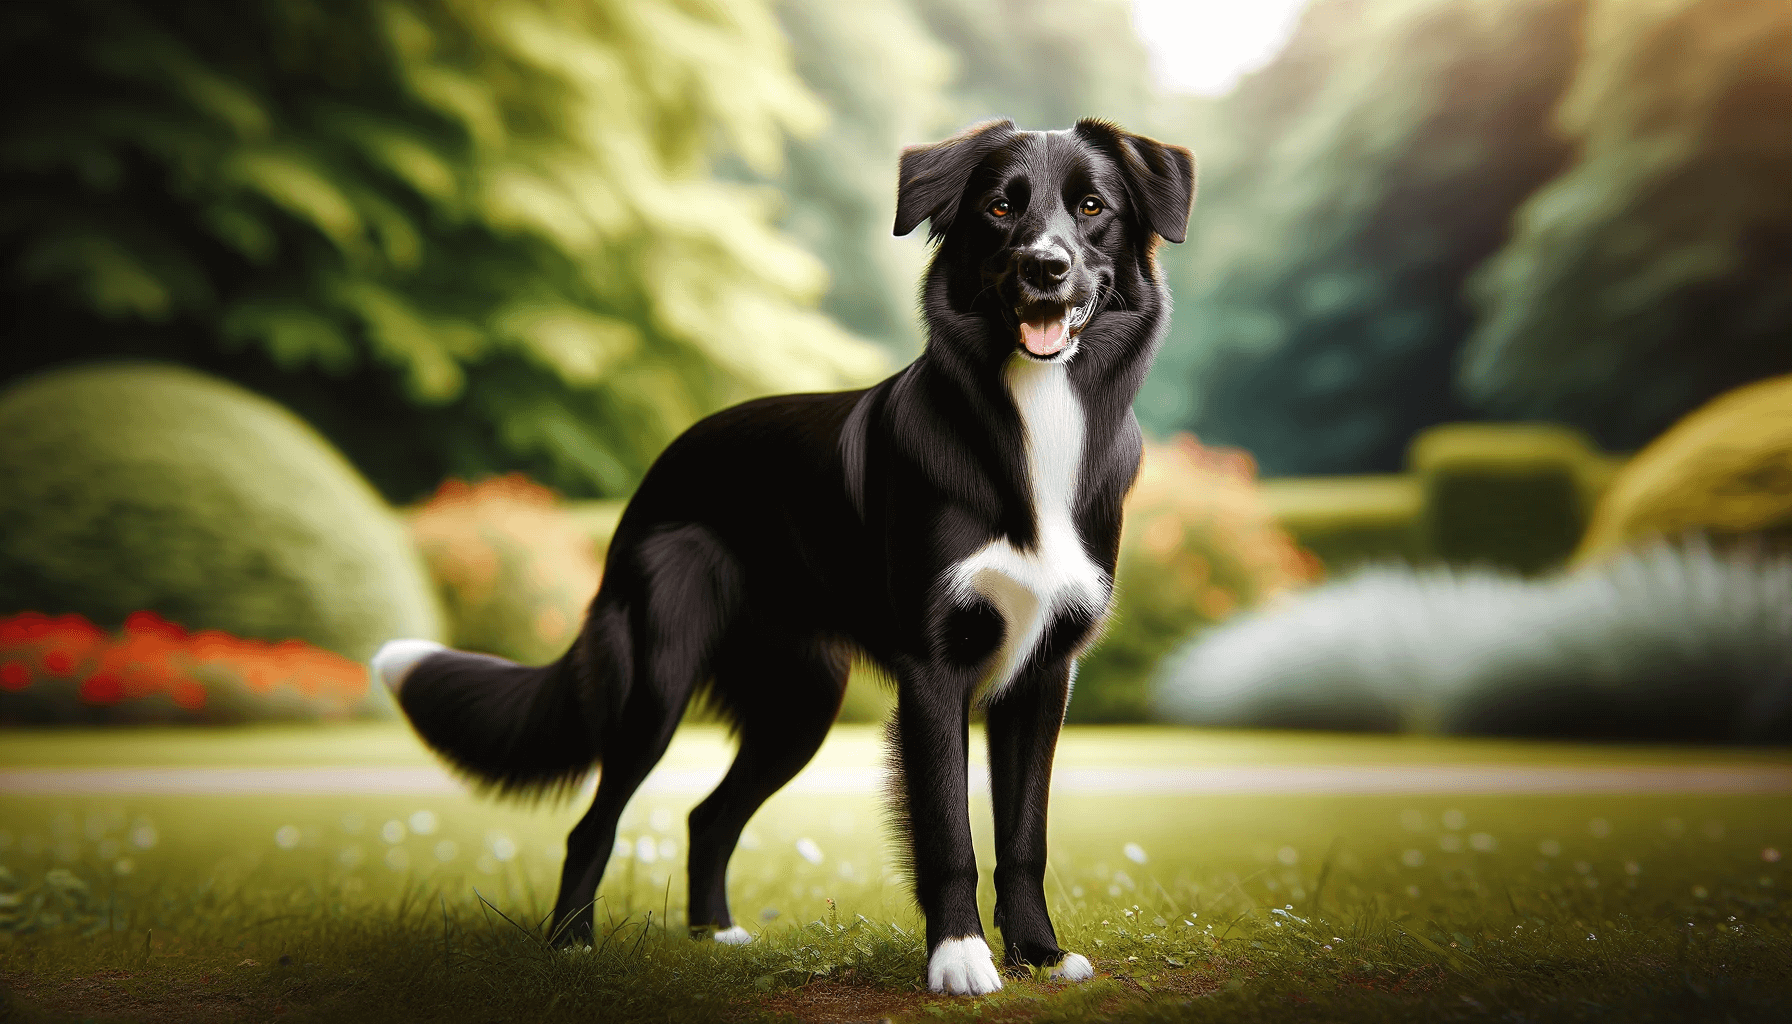 Borador Border Collie Lab Mix with a glossy black coat and a prominent white blaze on the chest. It's posed in a natural setting, suggesting a happy demeanor.